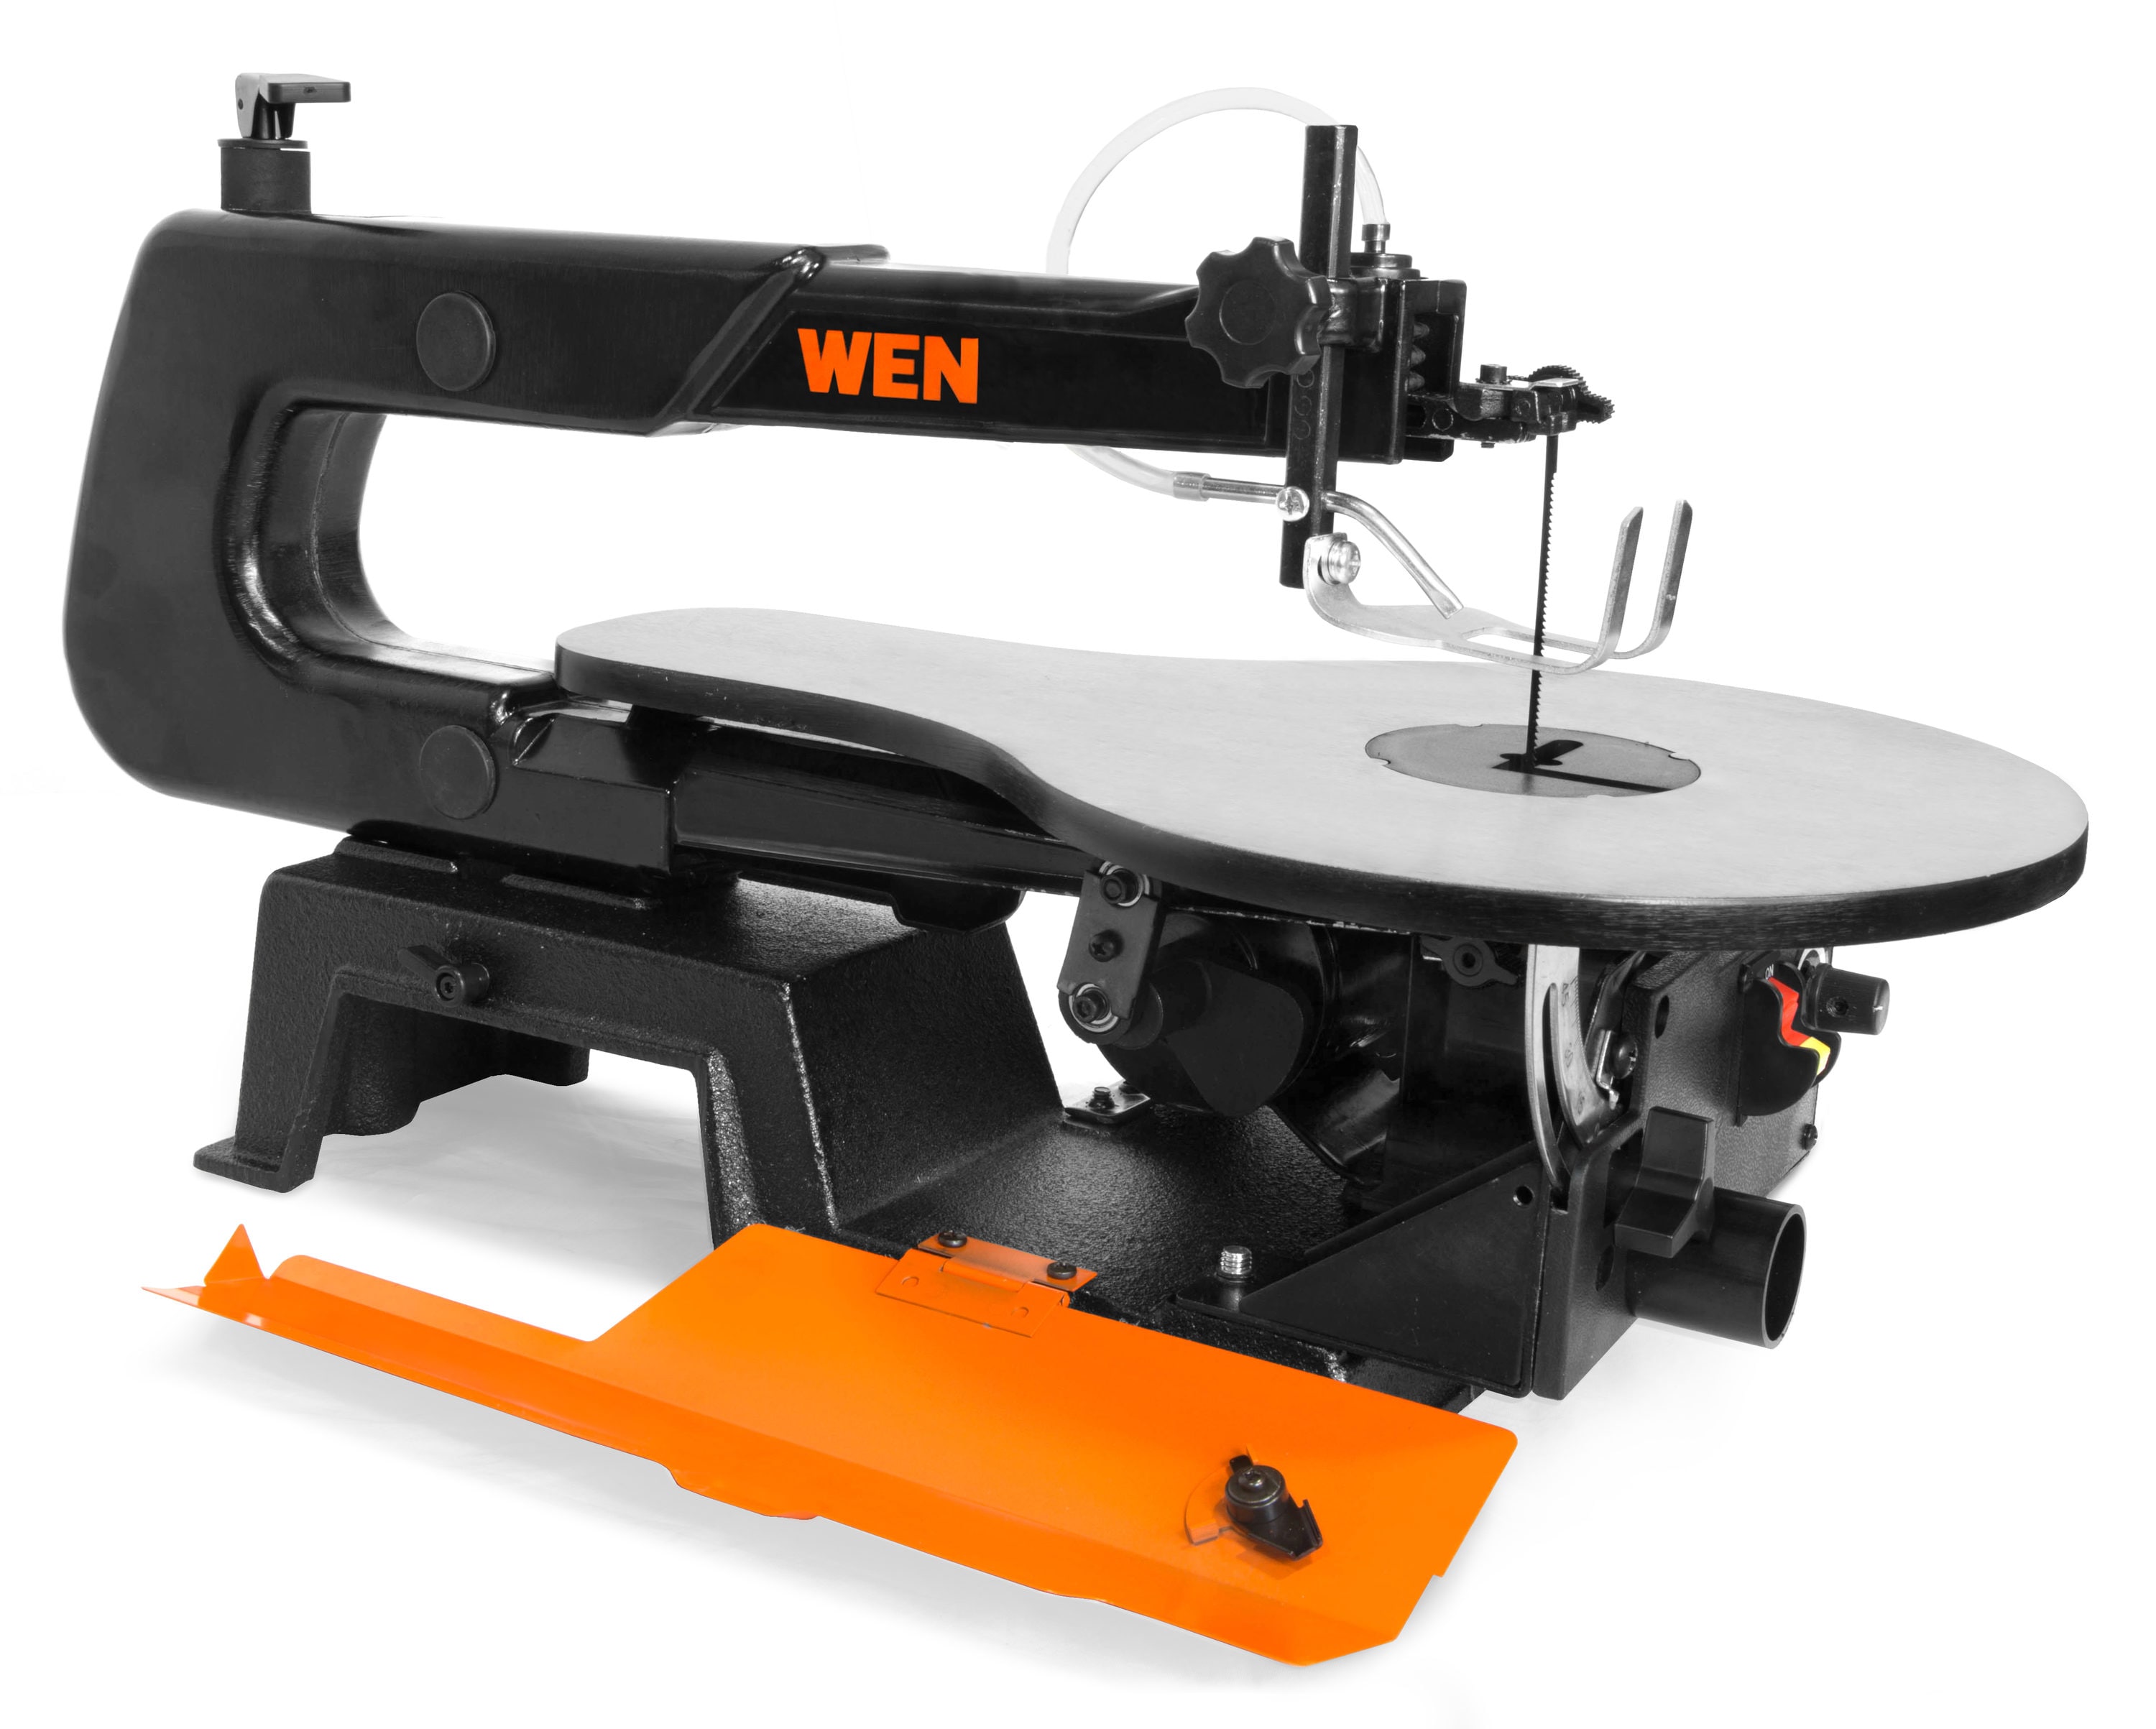 WEN 16-in 1.2-Amp Variable Speed Corded Scroll Saw